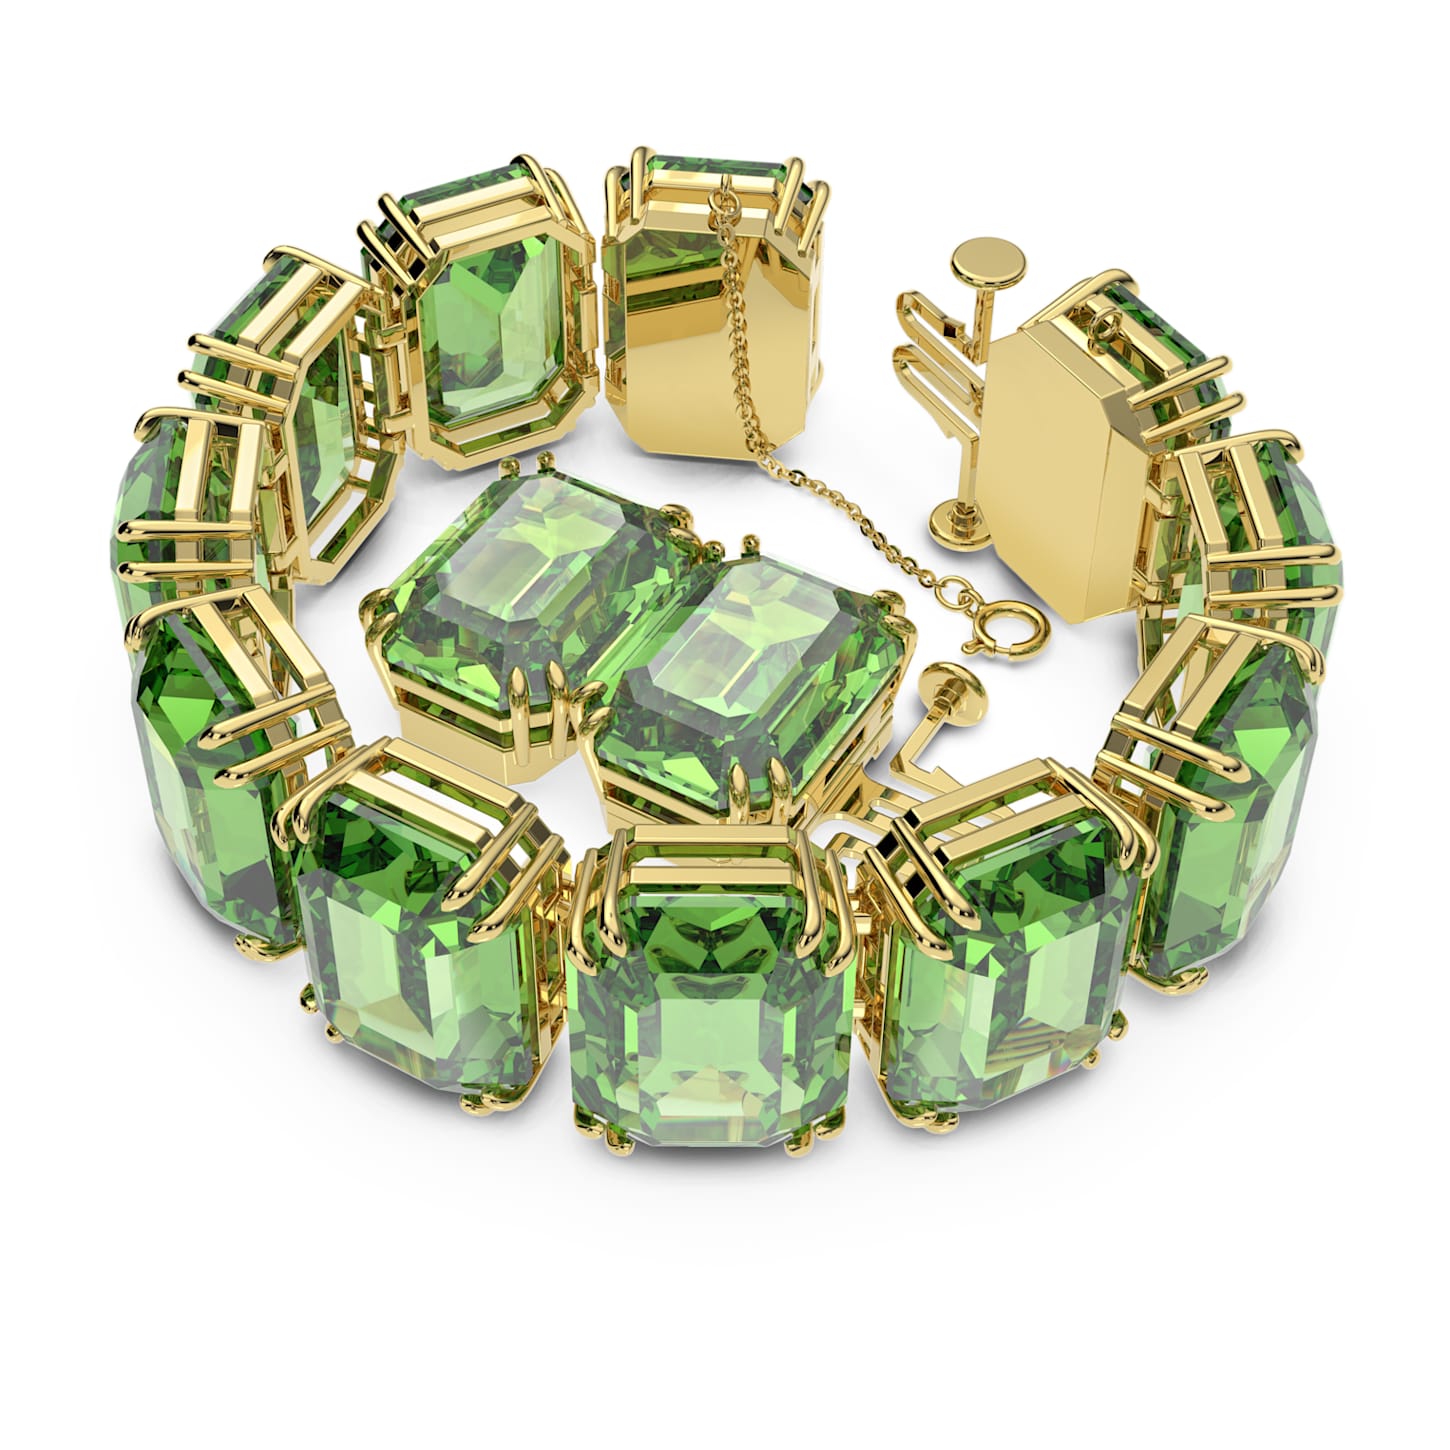 tuberculosis Grand delusion By the way bracelet-millenia--cristaux-oversize--taille-octogonale--vert--placage-de-ton-or- swarovski-5598347.png